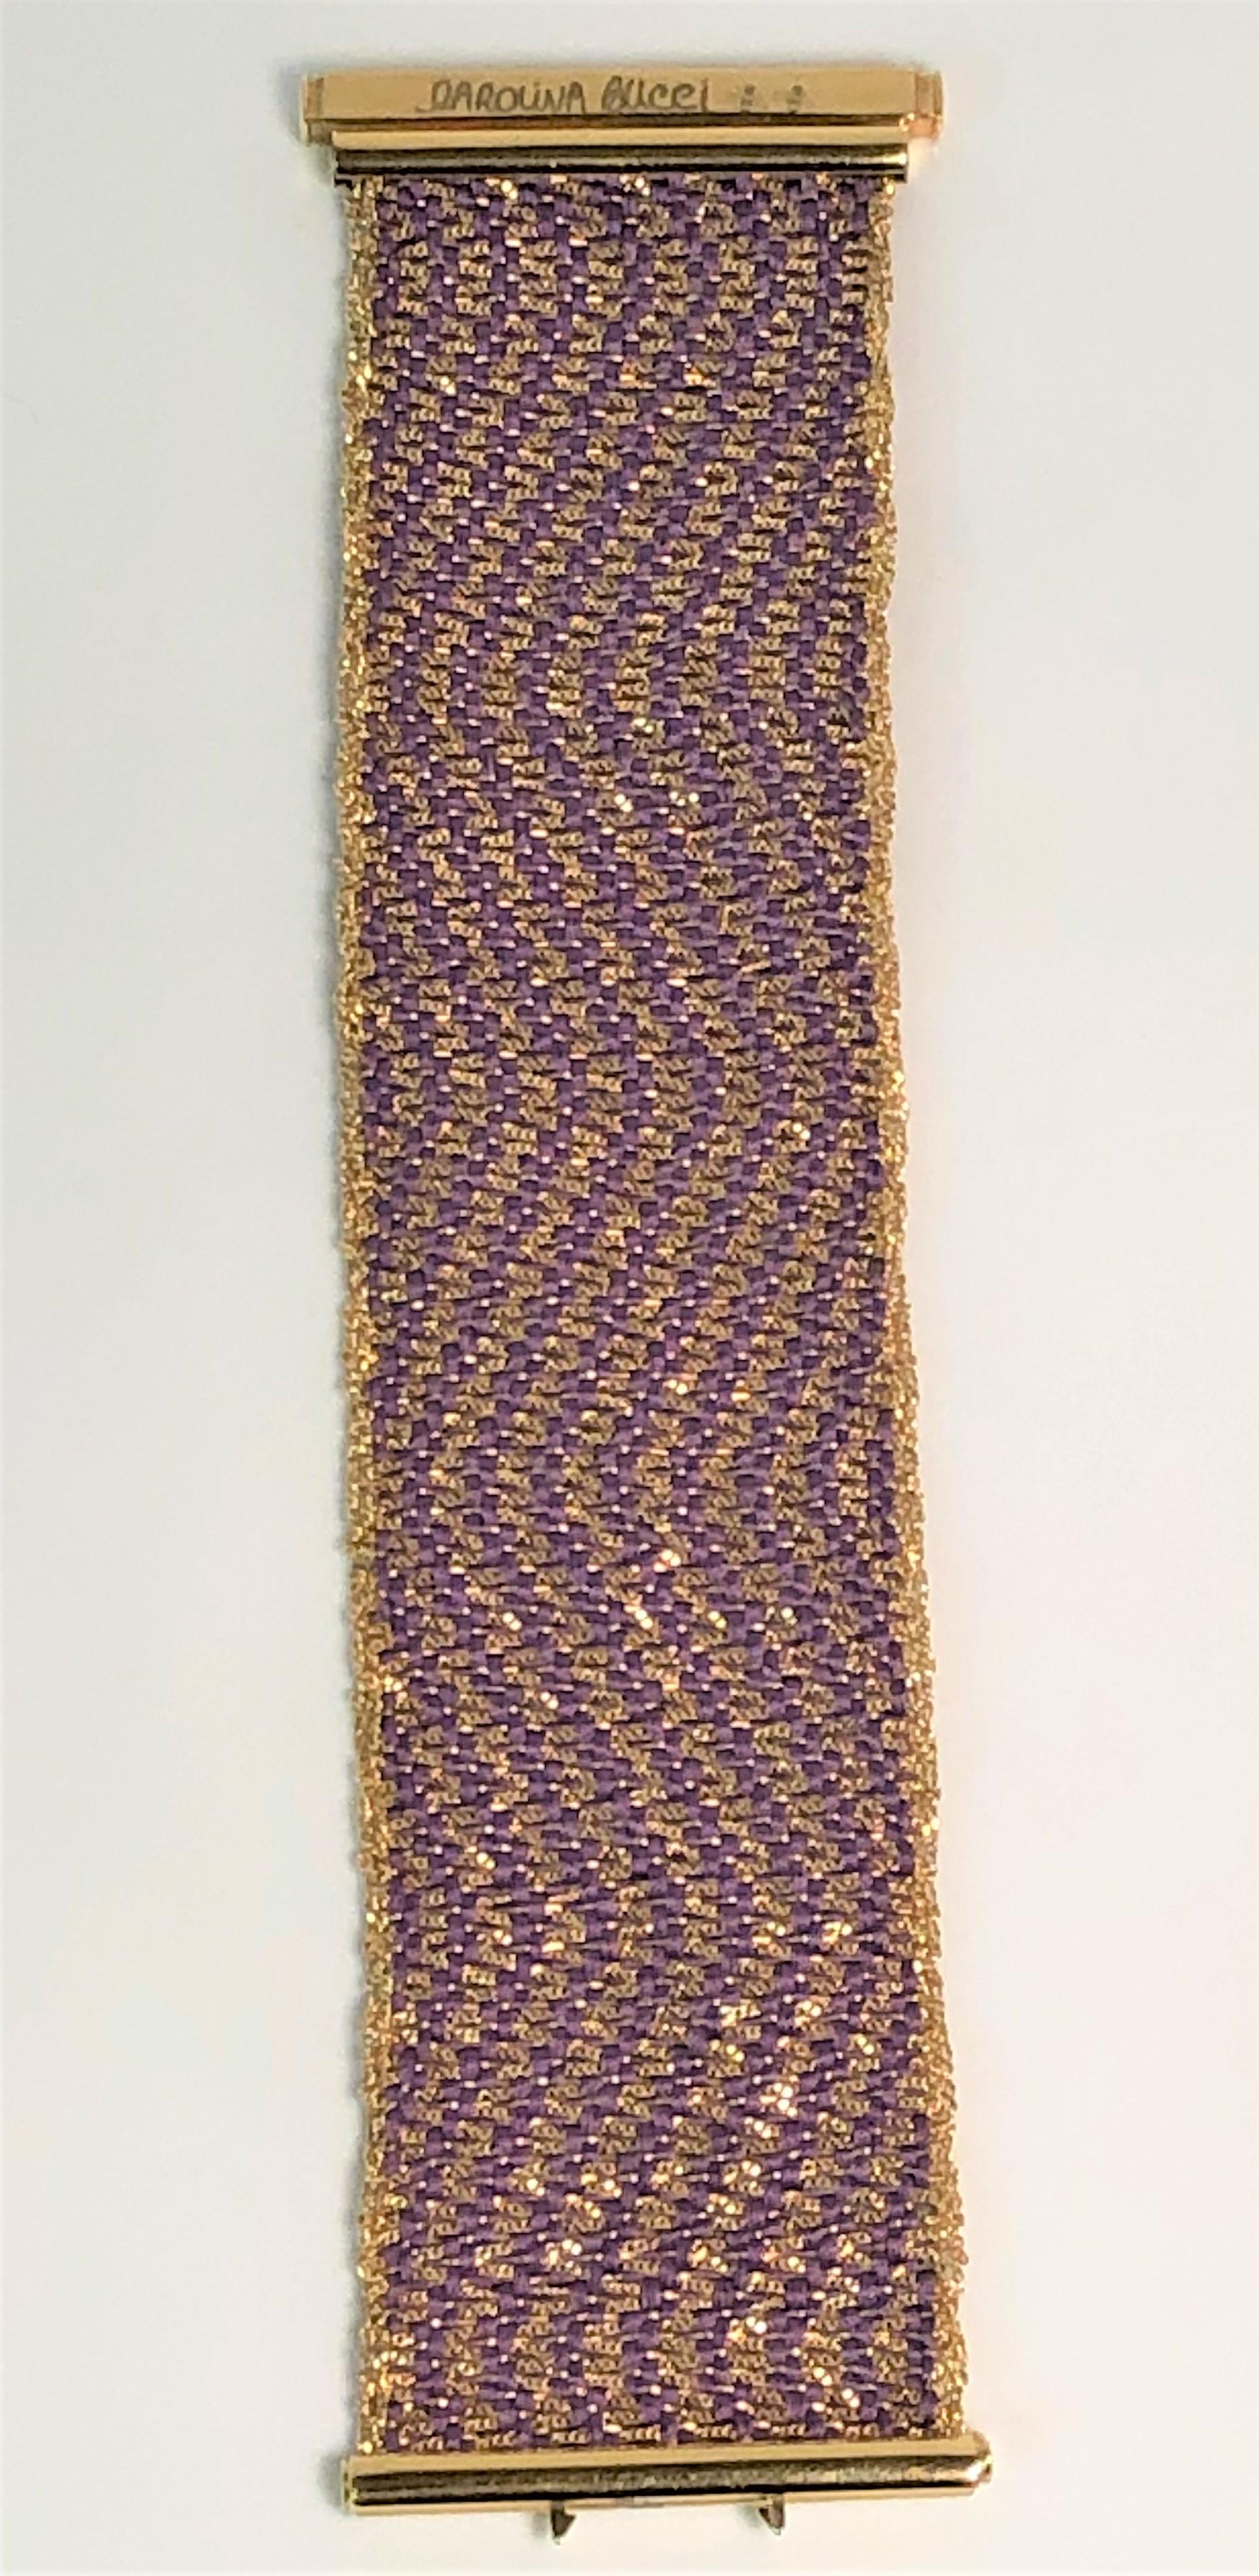 From designer Carolina Bucci, her design style really shows in this beautiful bracelet.
This has never been worn, and you can't find it any more!
18 karat yellow gold woven with purple silk strands in a wavy chevron pattern. 
Bracelet has a